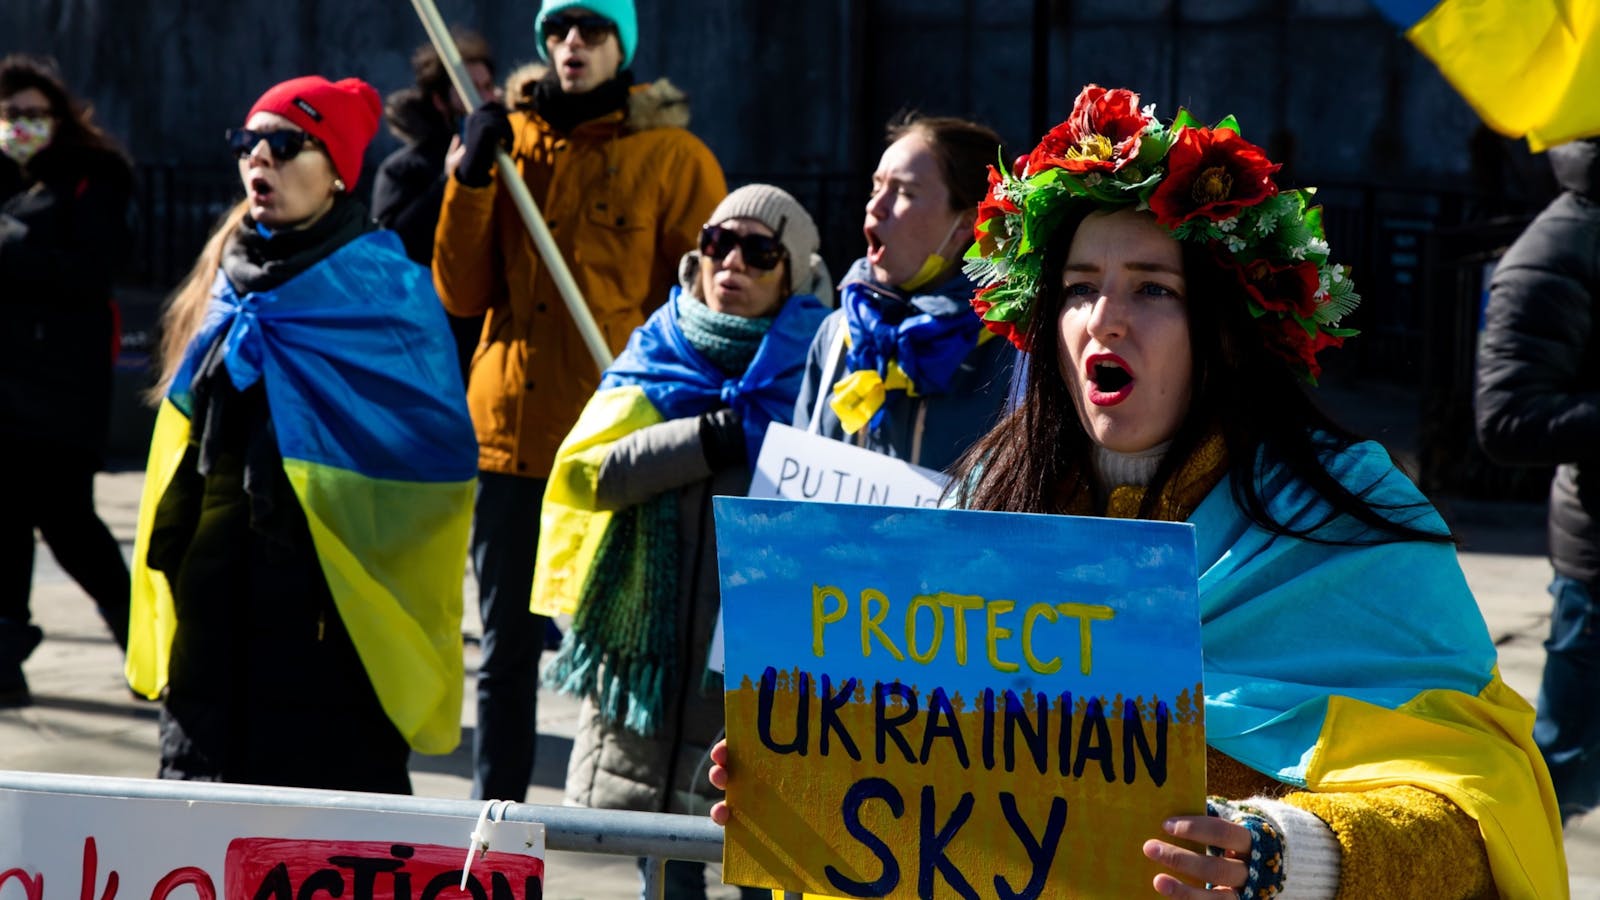  Demonstrators protesting the Russian invasion of Ukraine in front of the United Nations Headquarters in New York on Monday. Photo by Bloomberg